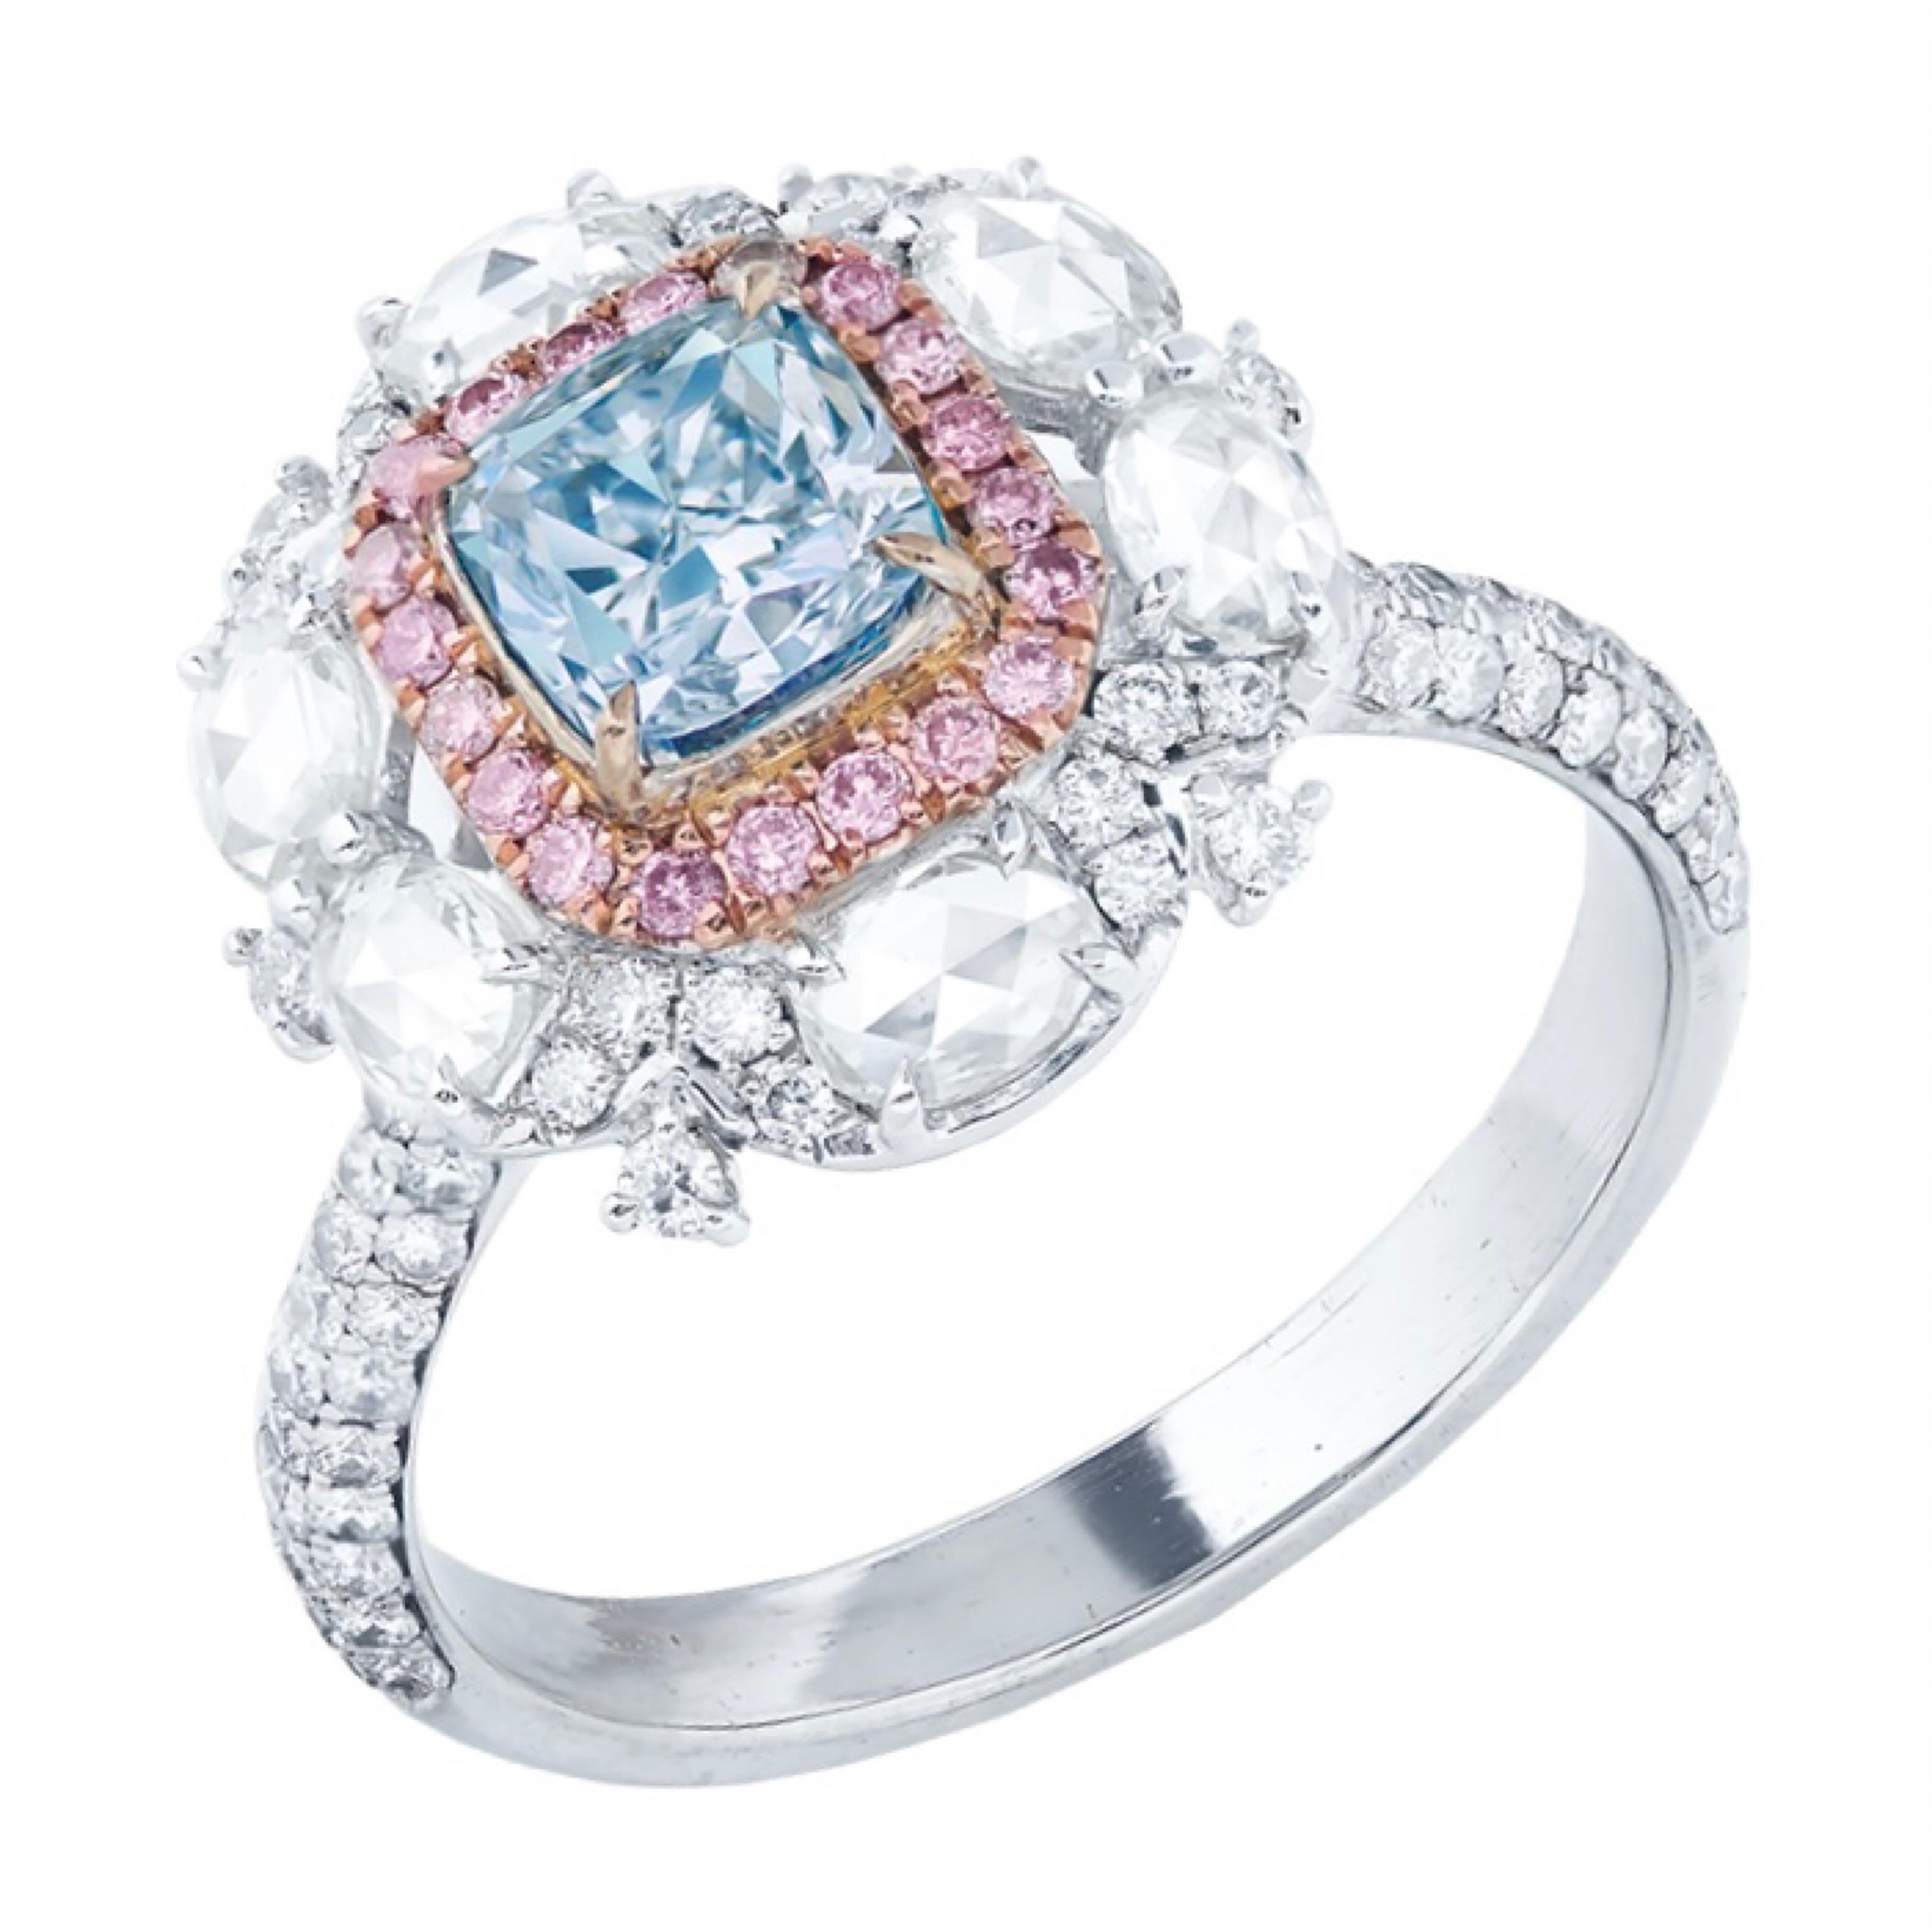 Main stone: 1.00 carat
Color: Very Light Blue
Clarity: SI2
Shape: CUSHION
Setting: 116 white diamonds with a total of approximately 0.736 carats, 6 white diamonds with a total of approximately 0.061 carats, 20 pink diamonds with a total of